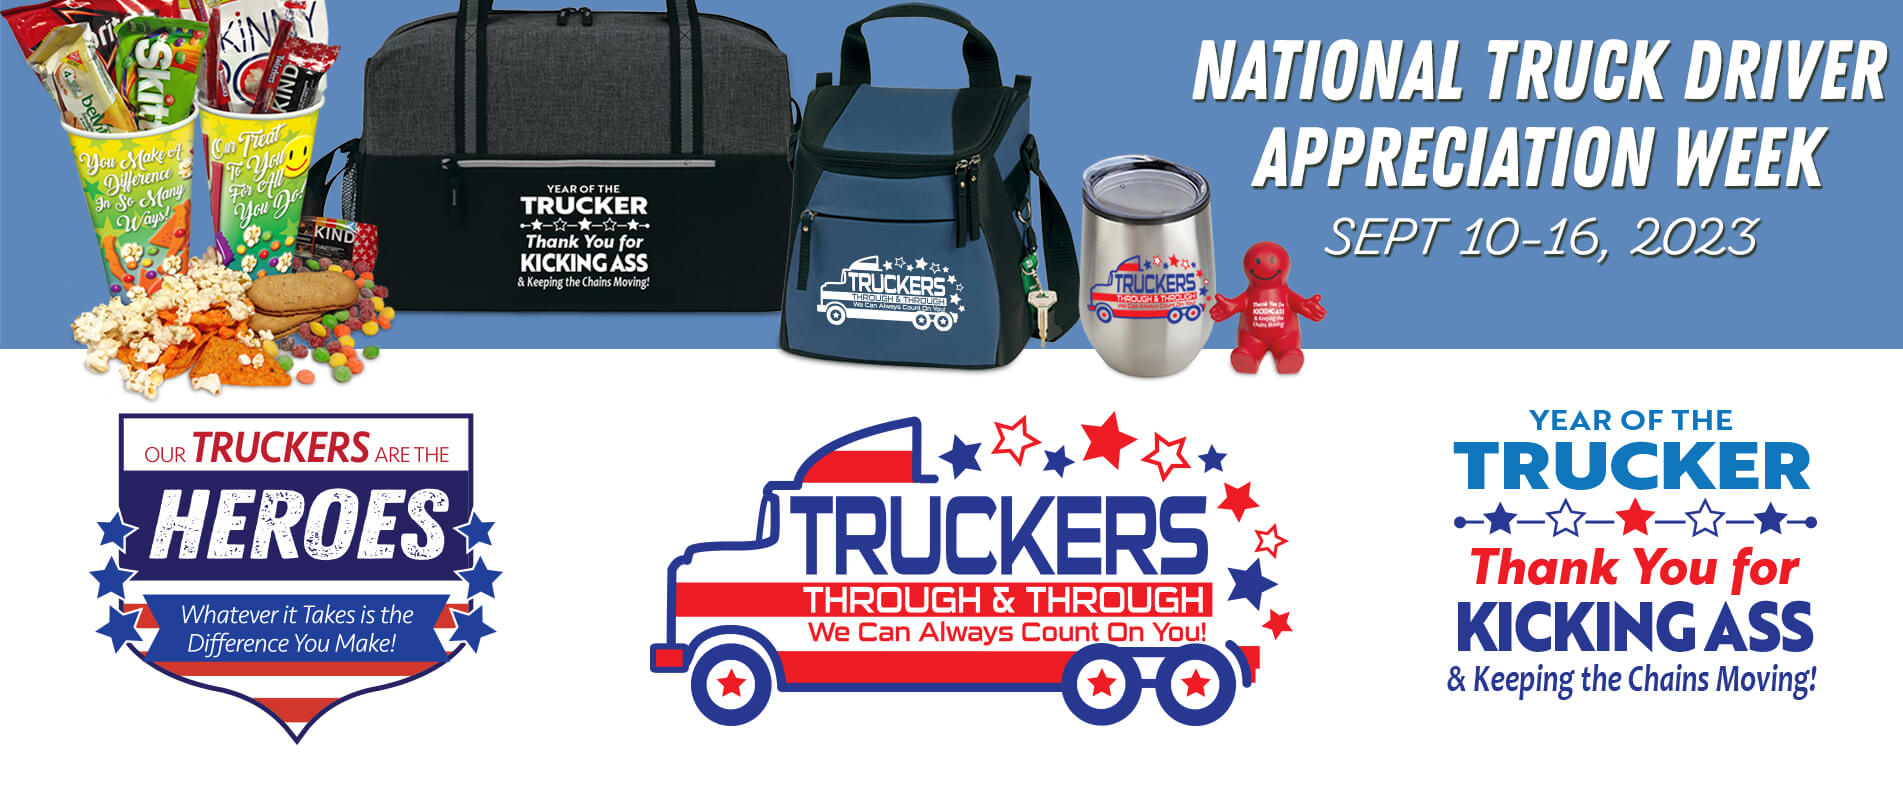 Christmas Gifts for Truckers in 2020 - CDL Legal